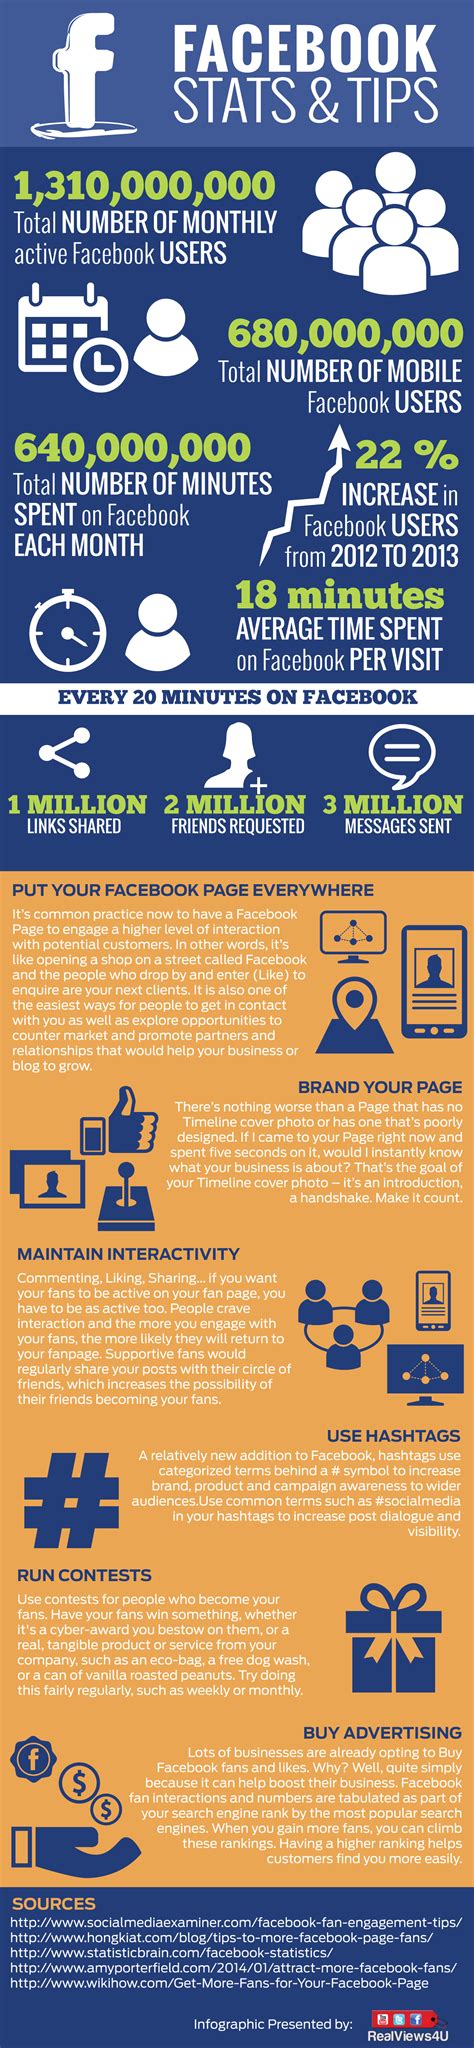 facebook stats  tips infographic visualistan